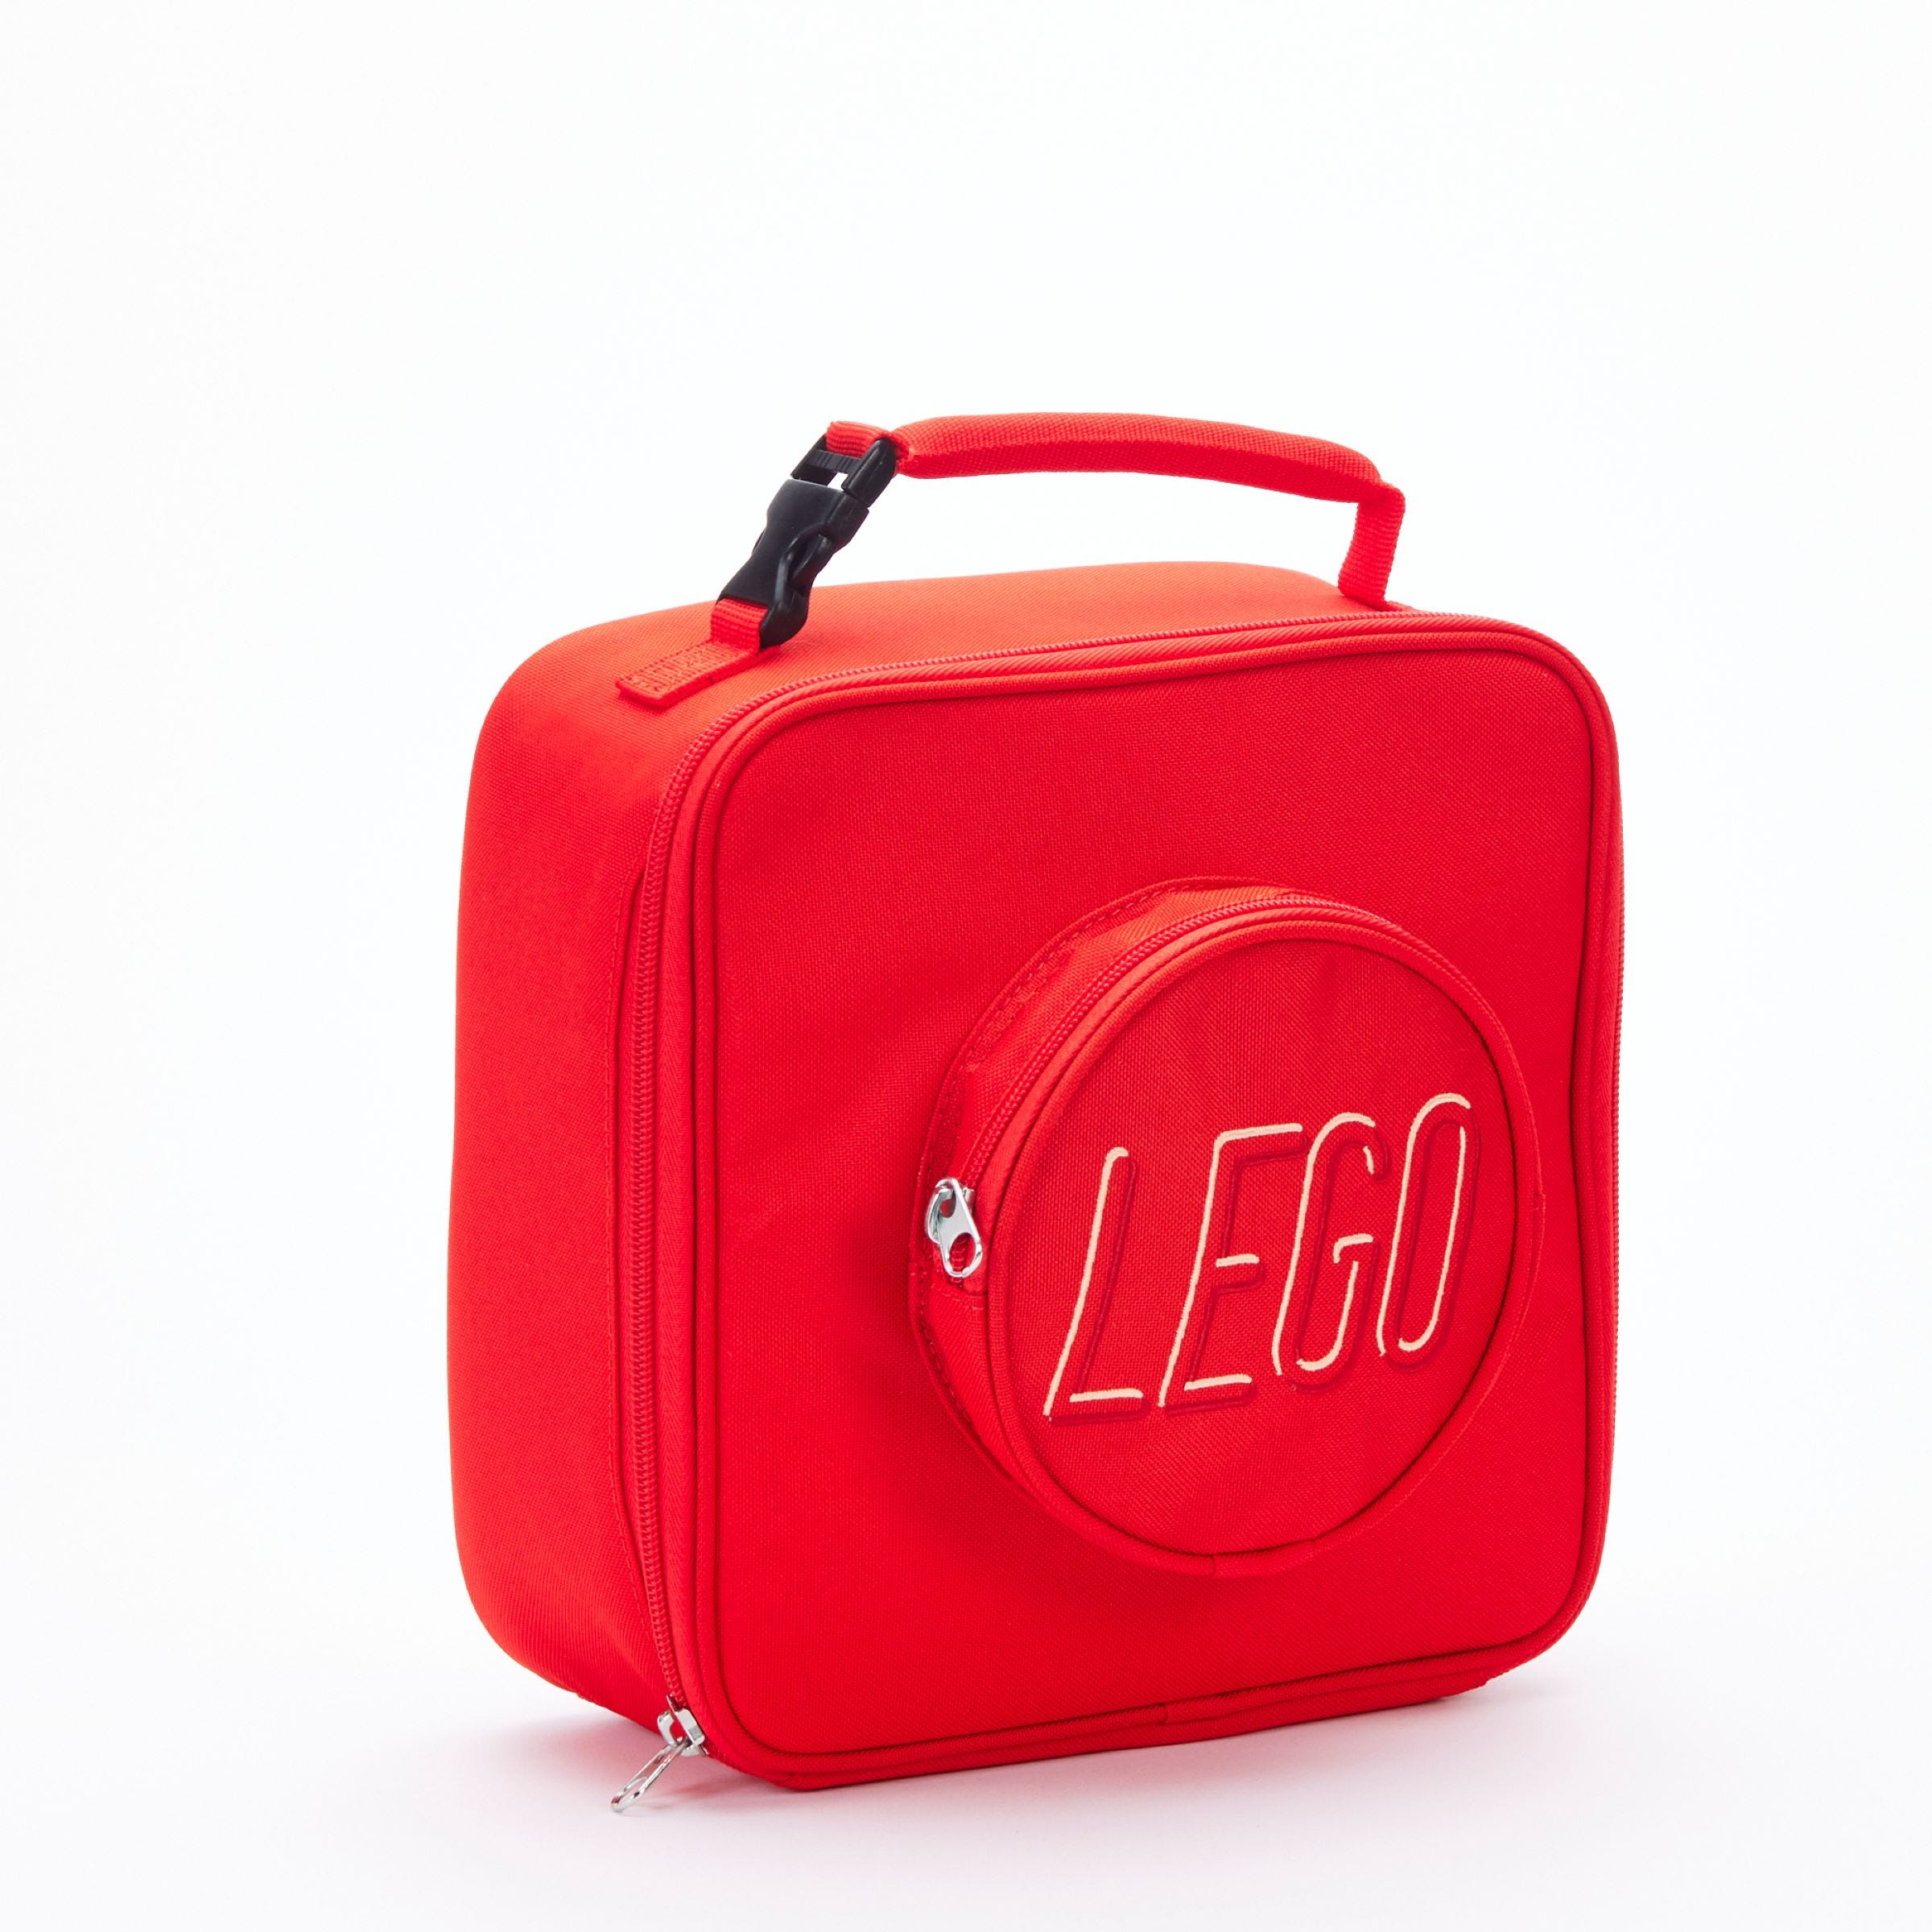 Brick Lunch Bag - Red